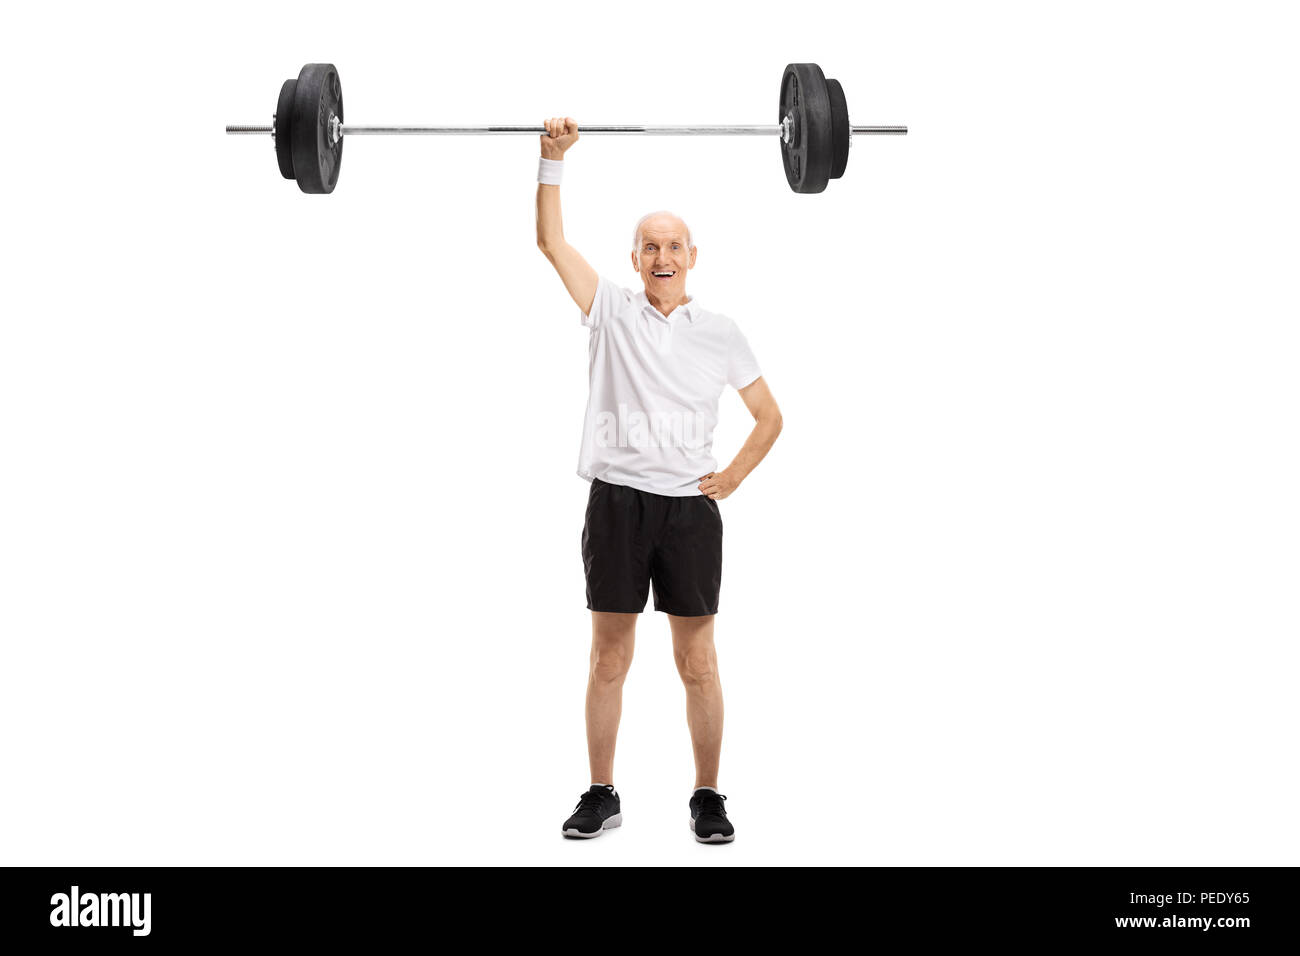 Full length portrait of a senior lifting a barbell with one hand isolated on white background Stock Photo